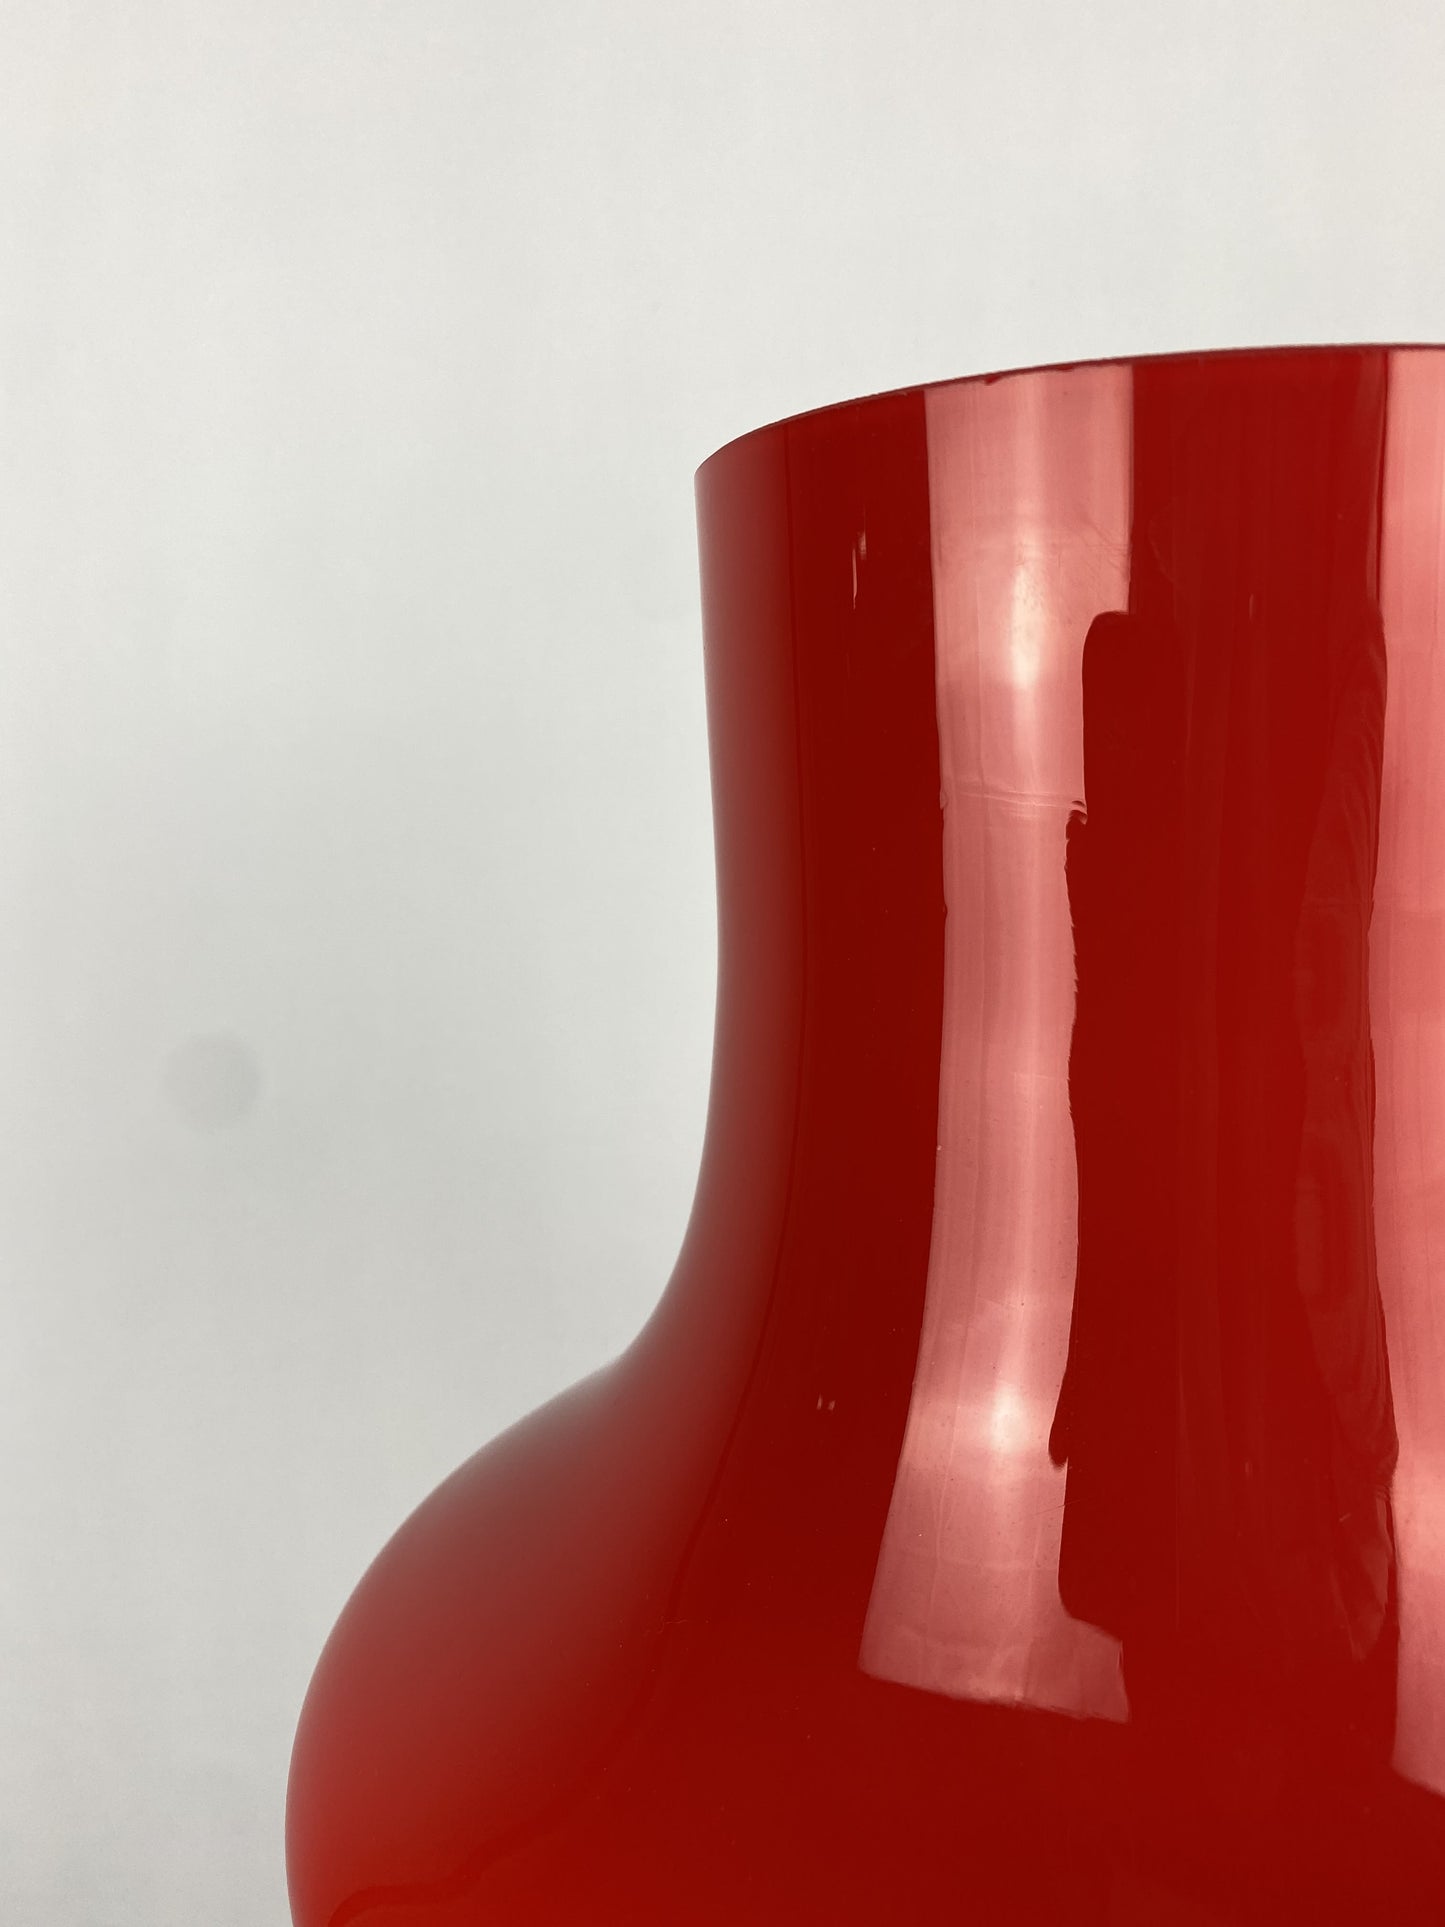 Mid-century cherry red table lamp by Stefan Tabery for Opp Jihlava 1960